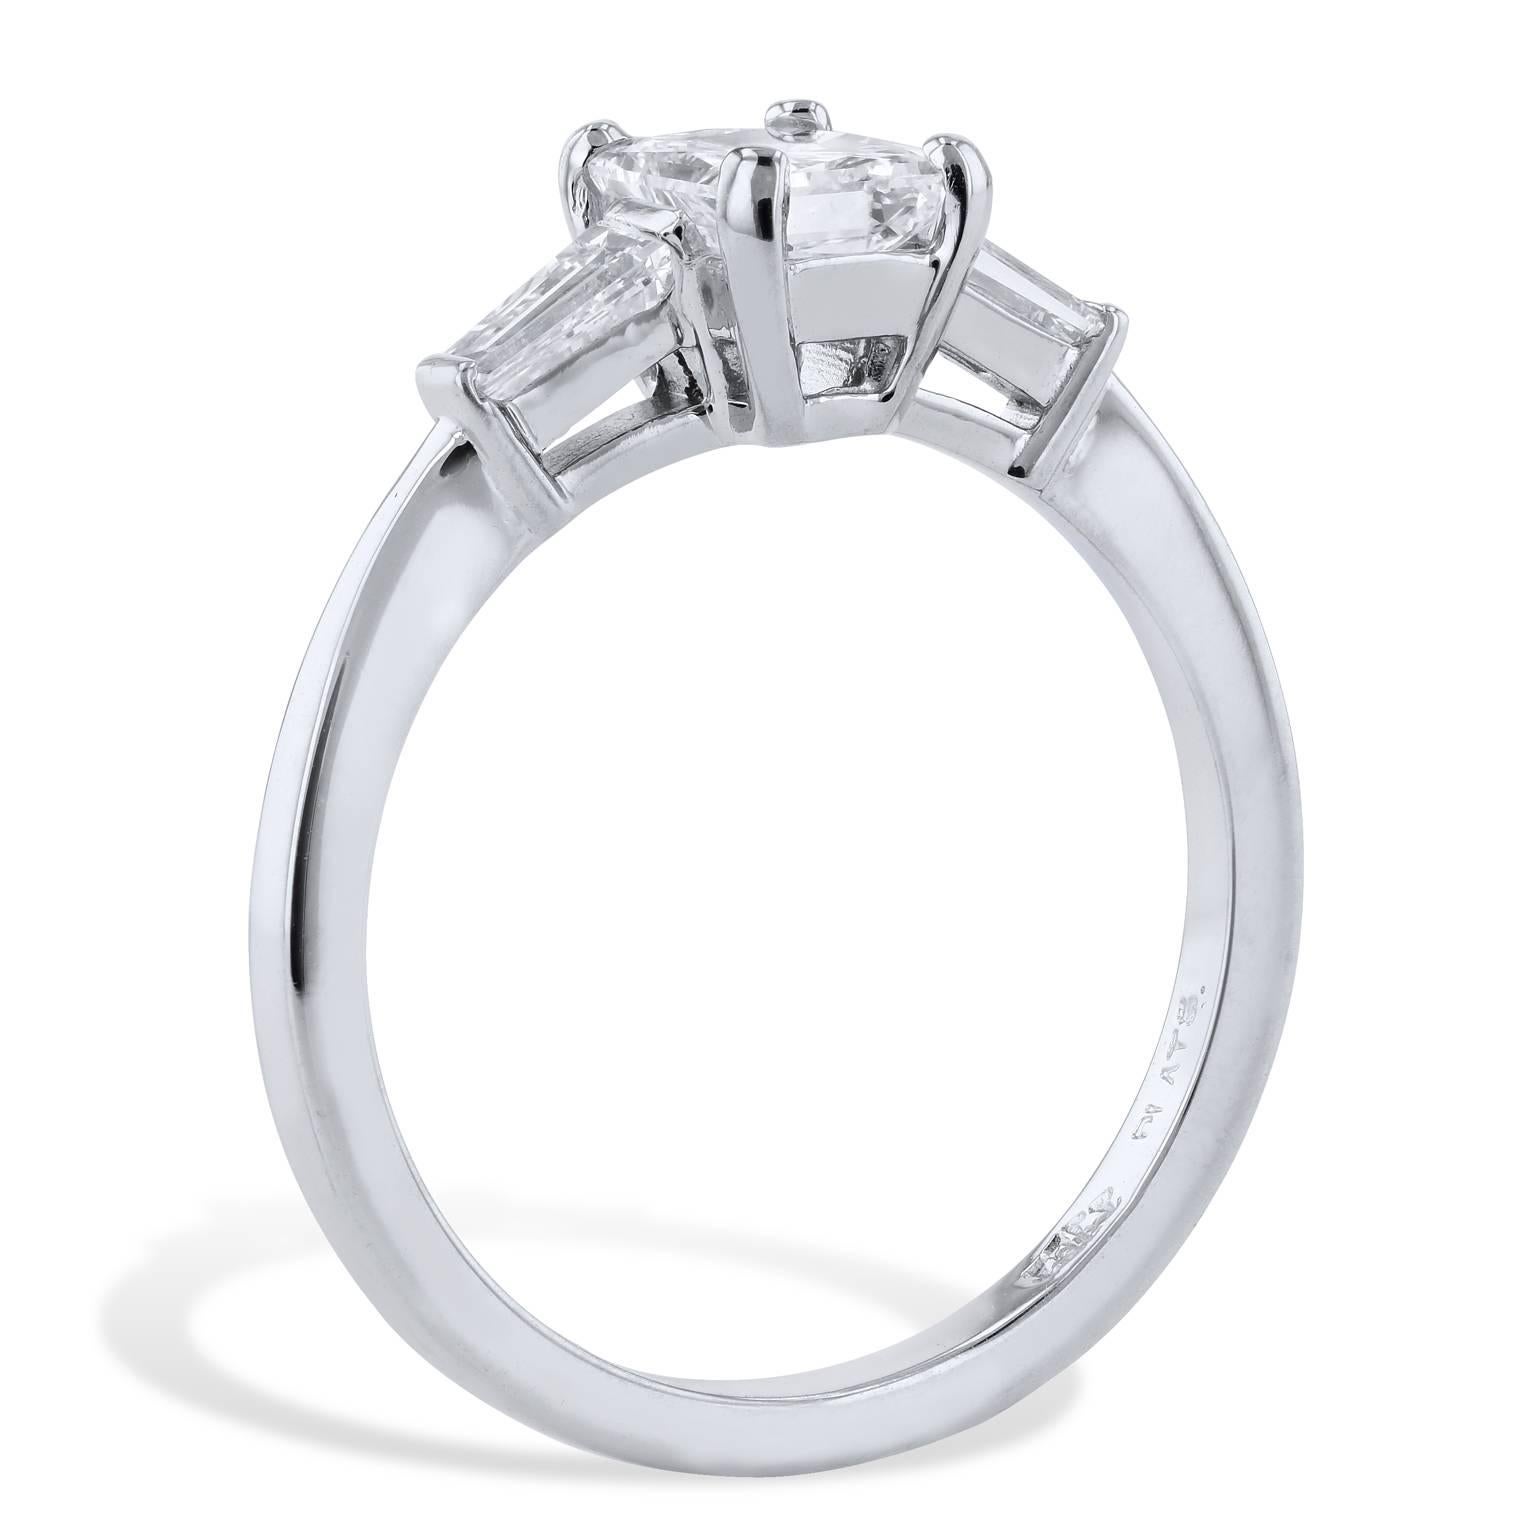 Leave her suspended in a dream with this beautiful H & H, handmade platinum diamond engagement ring. Two tapered baguette diamond side stones weighing a total of 0.30 carat (I/VS) draw the eye toward the lovely 1.00 carat diamond set at center (GIA